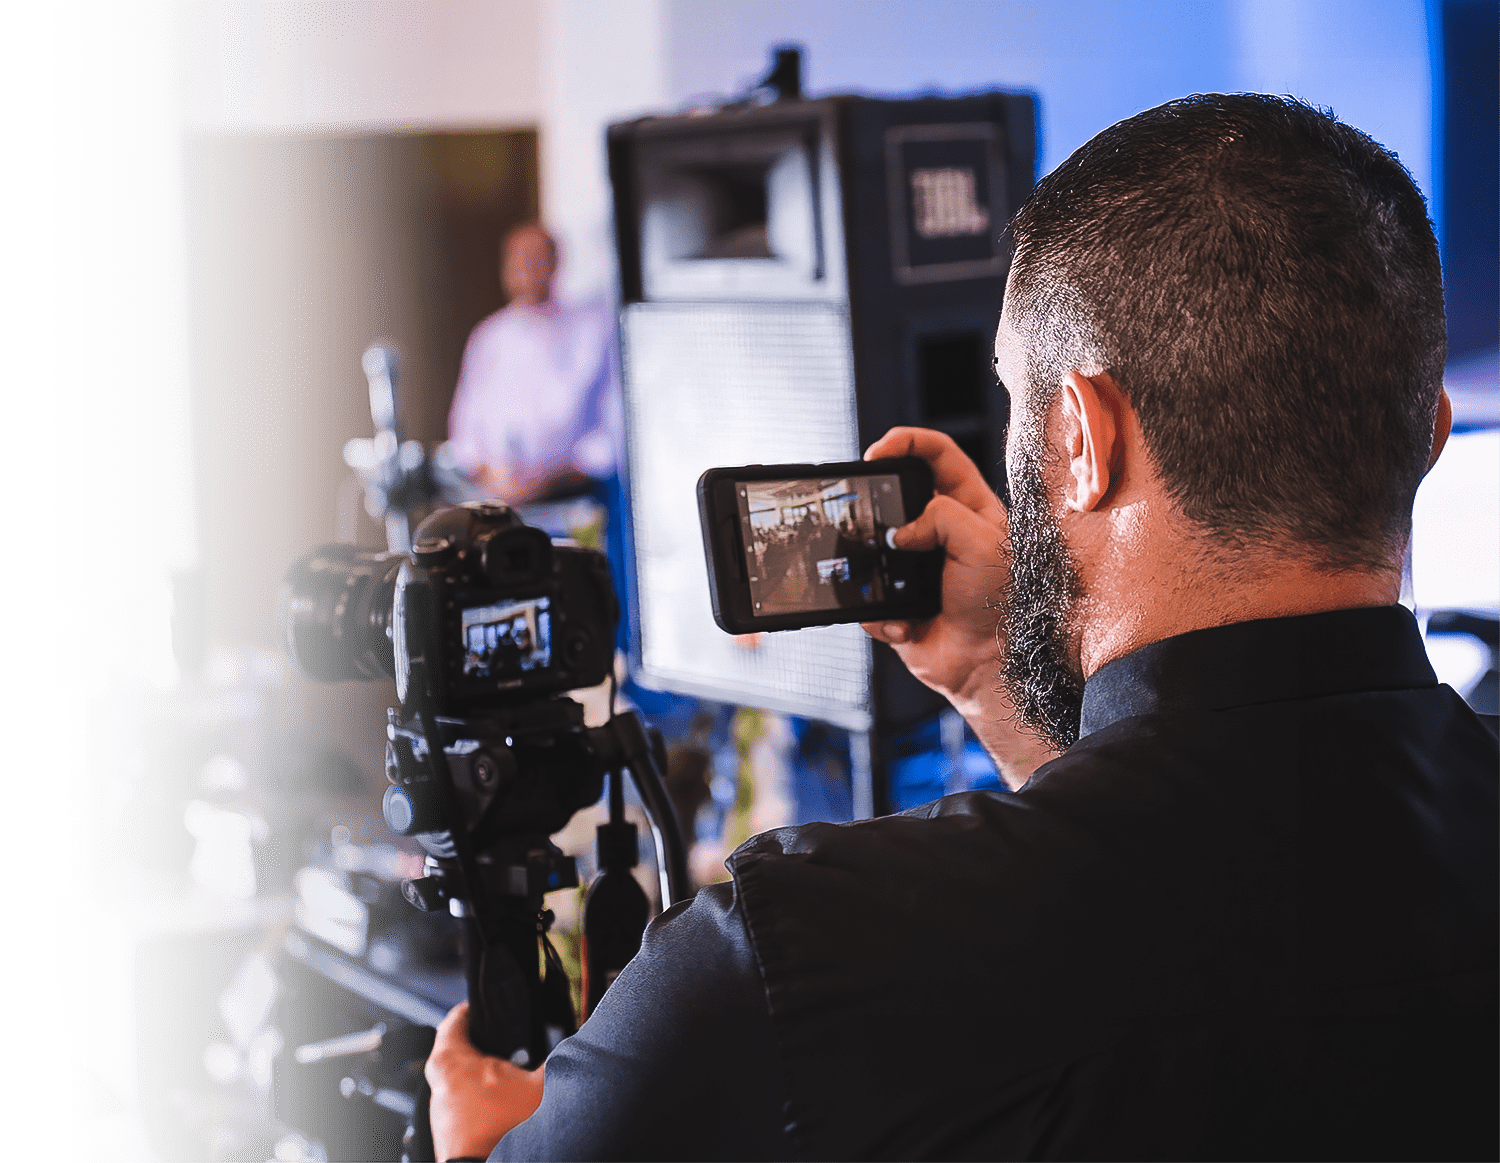 5J Media - Specialist in providing professional video and audio production services